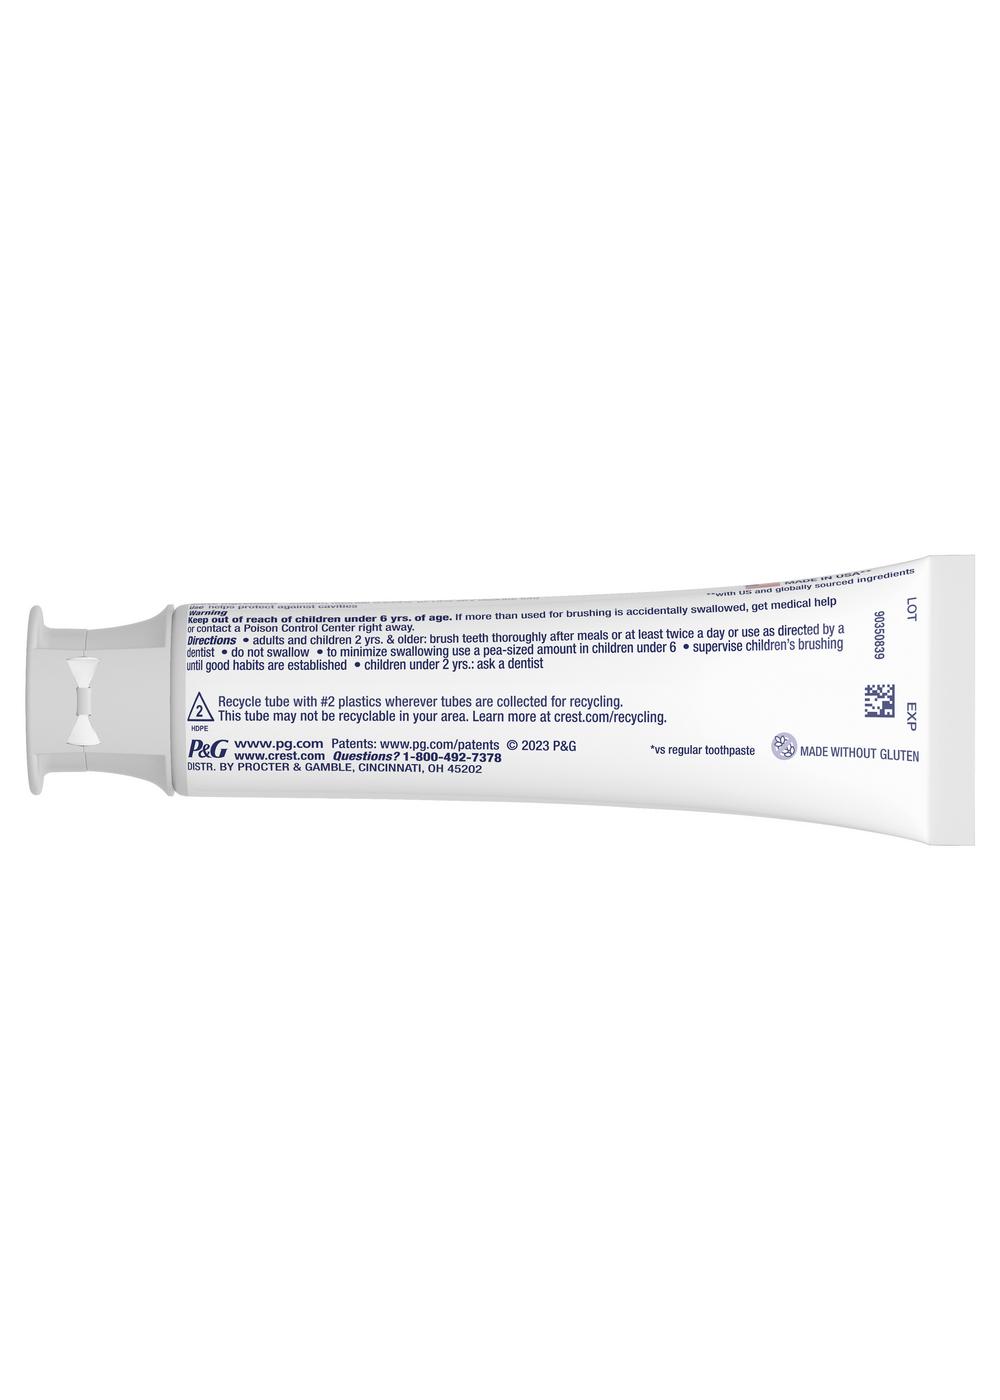 Crest 3D White Advanced Whitening Toothpaste - Express White; image 8 of 16